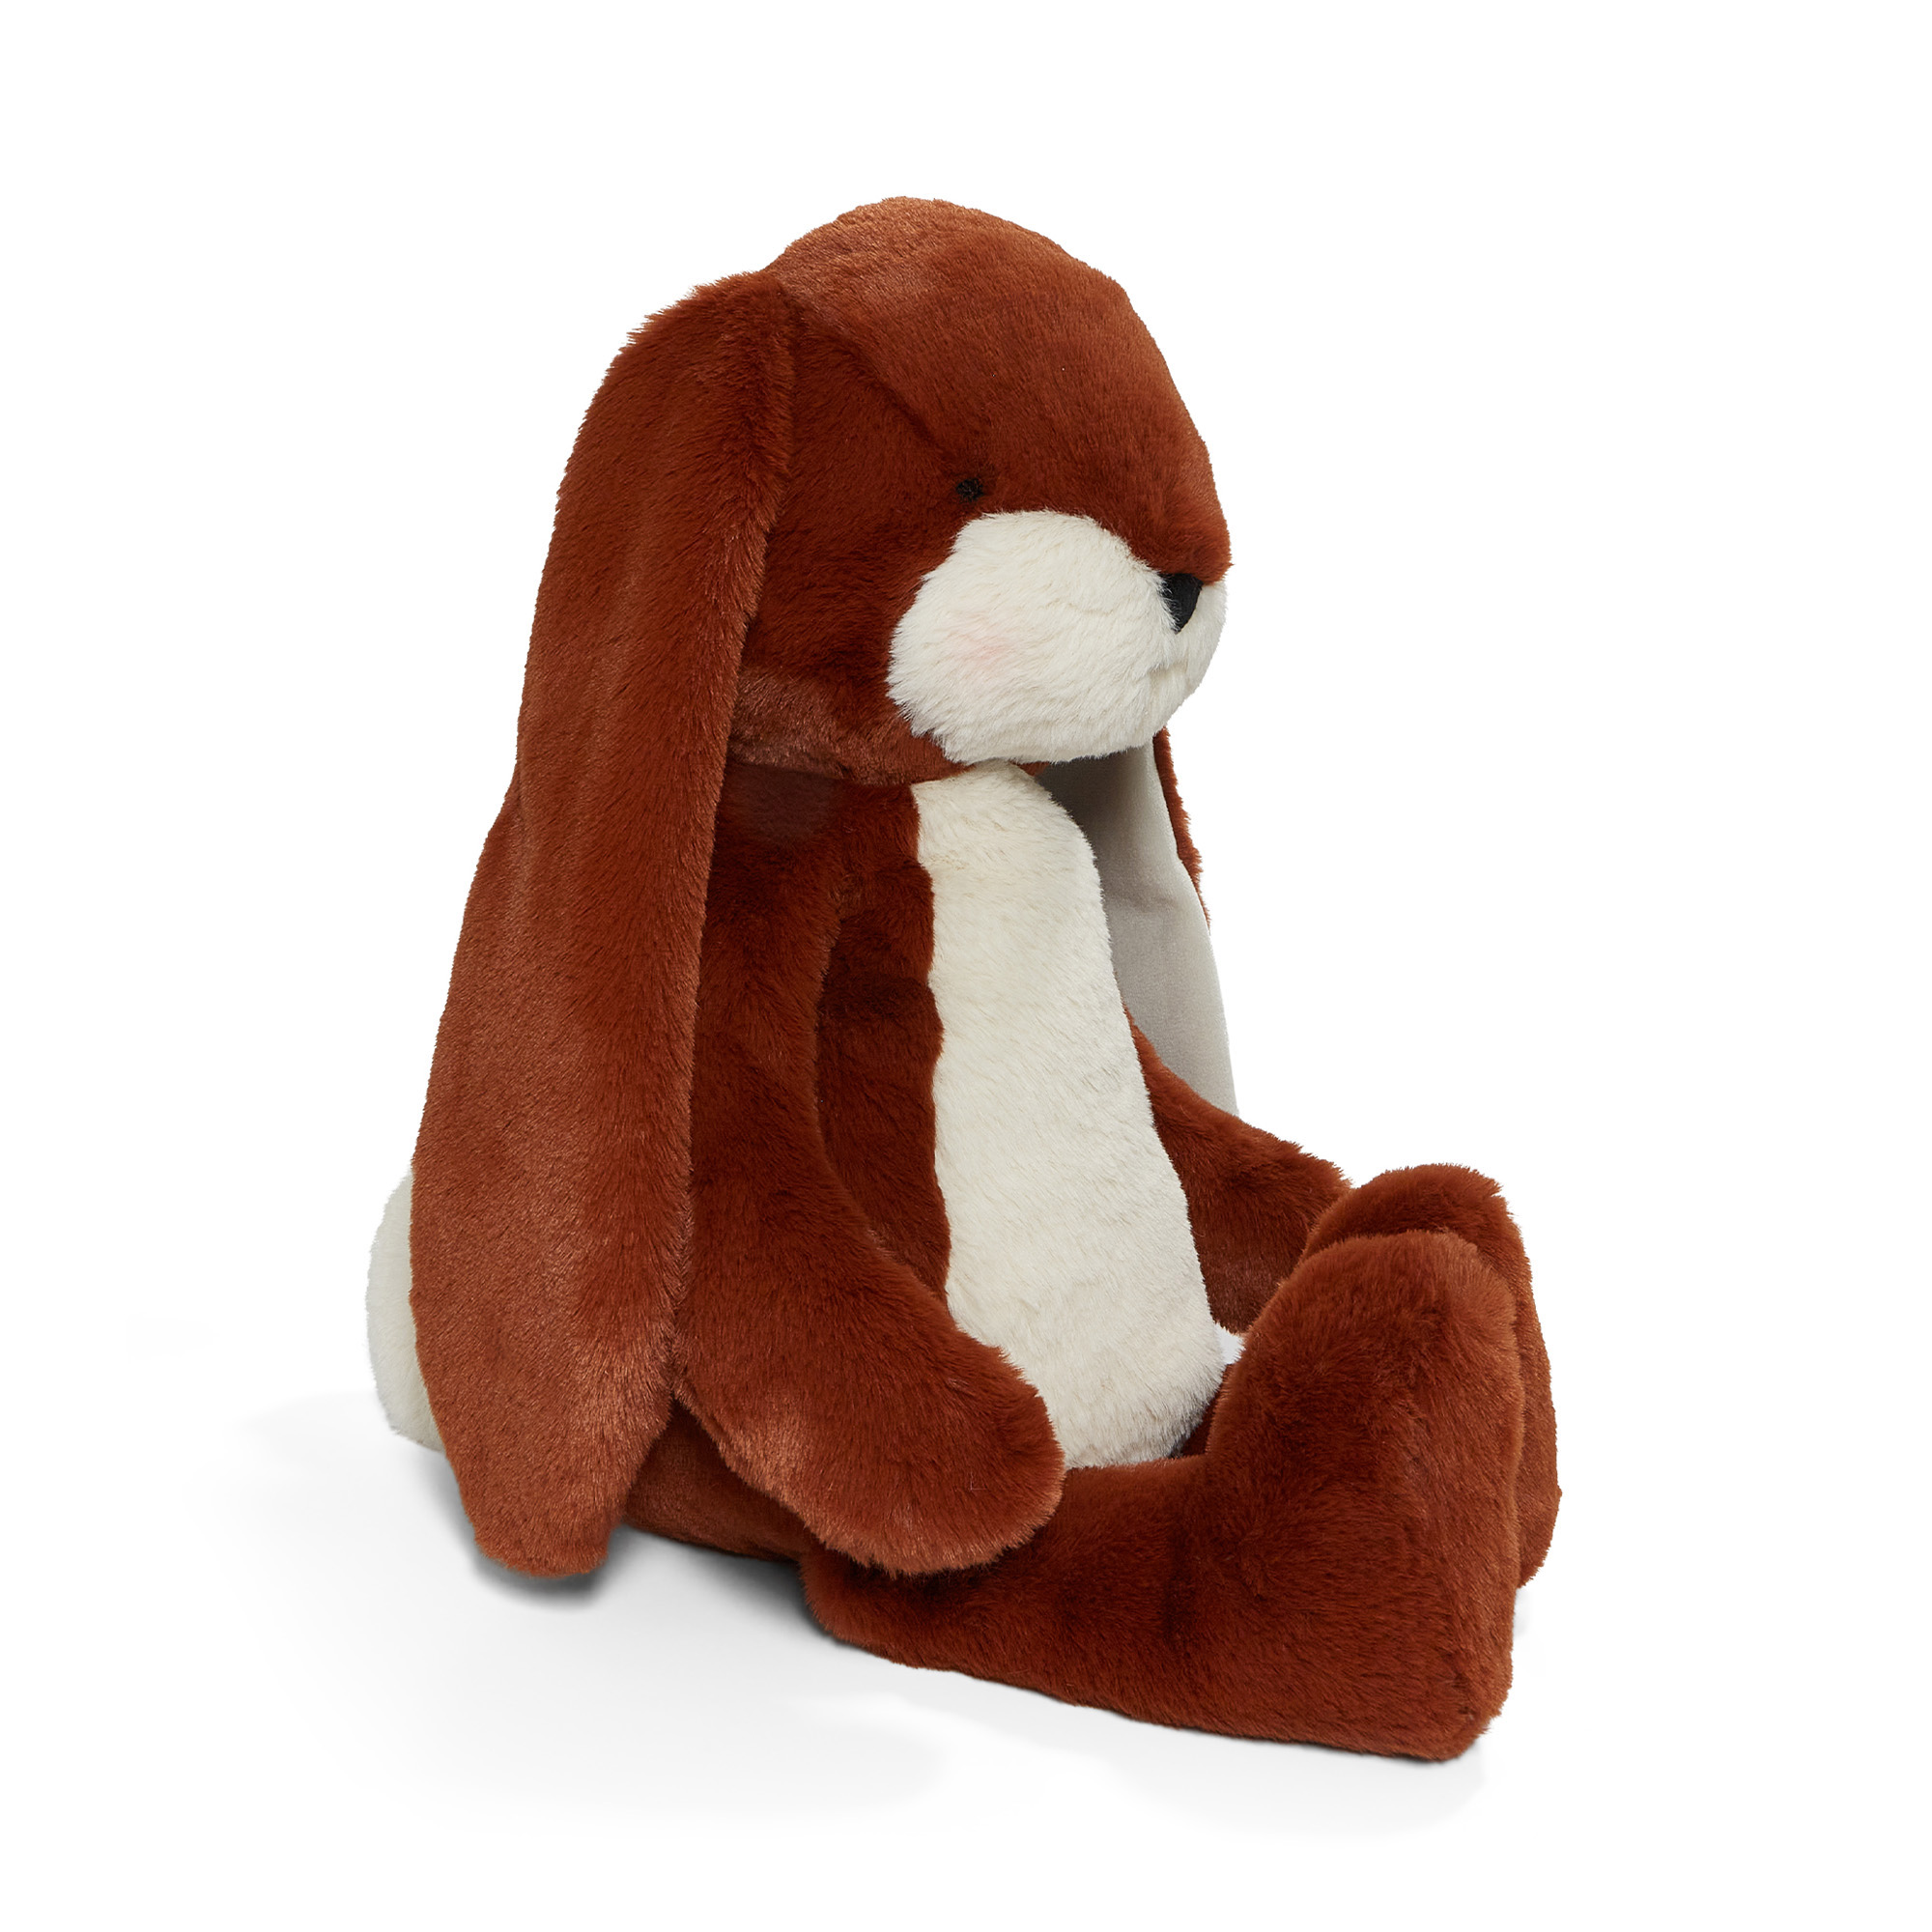 Peluche big nibble floppy paprika 50cm - Bunnies By The Bay